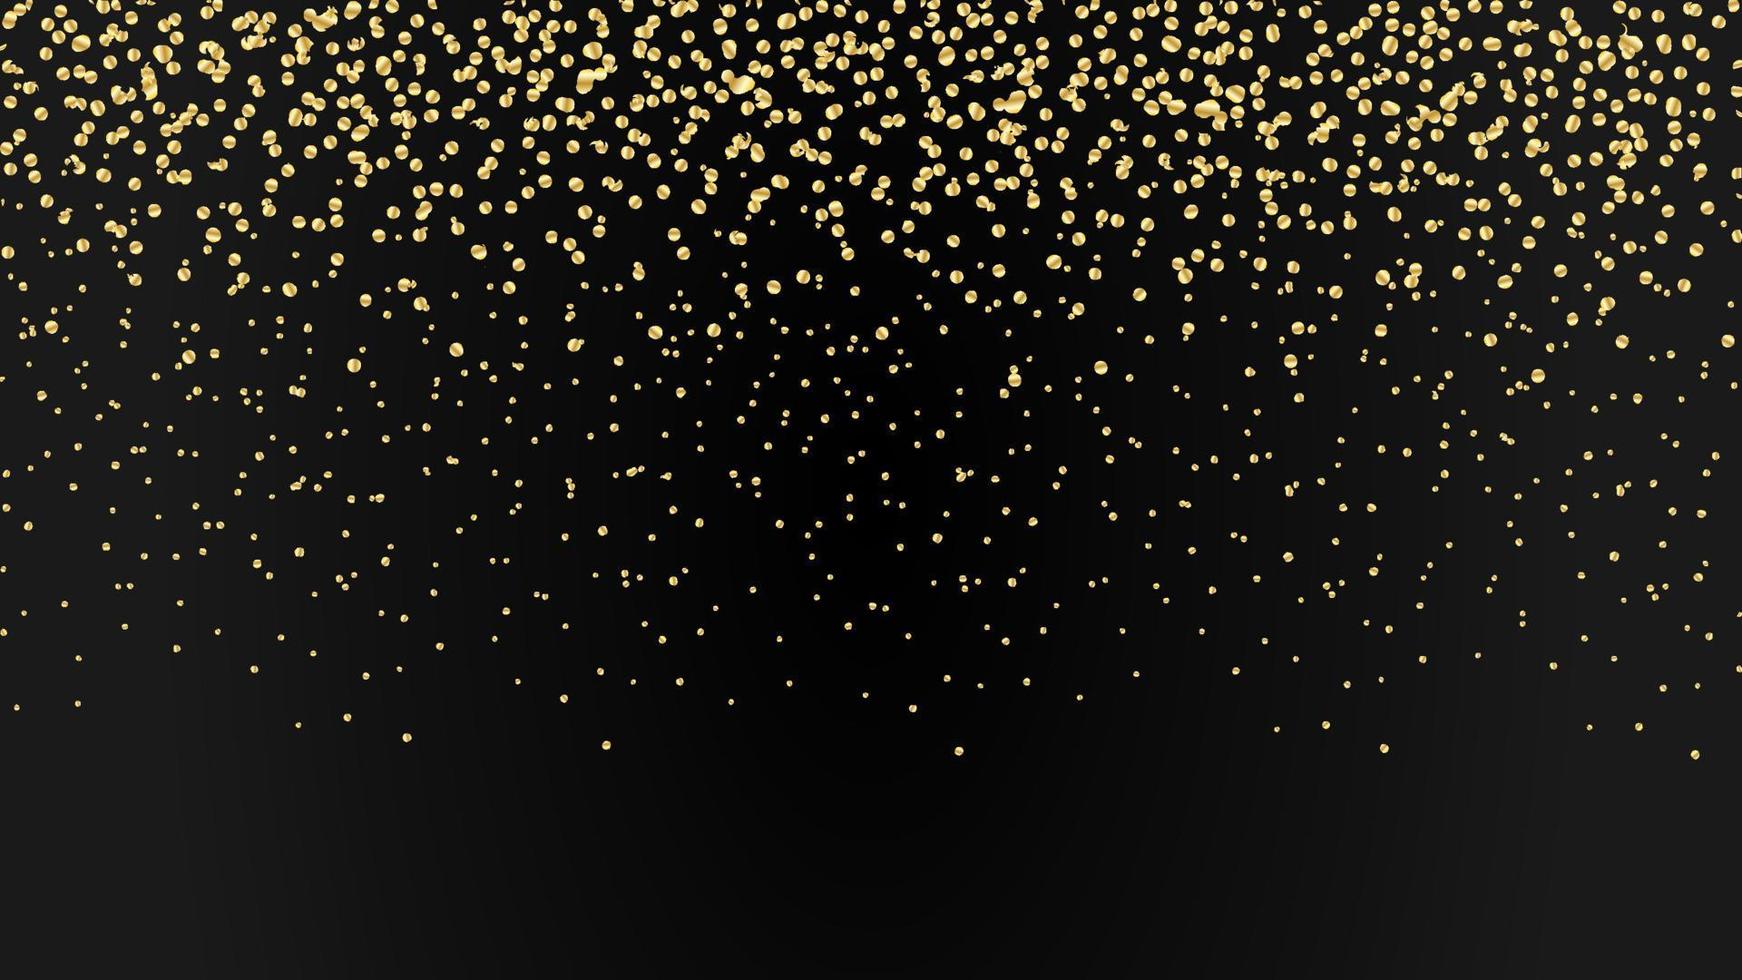 festive frame with falling iridescent gold glitter shimmer, copy space for your text vector